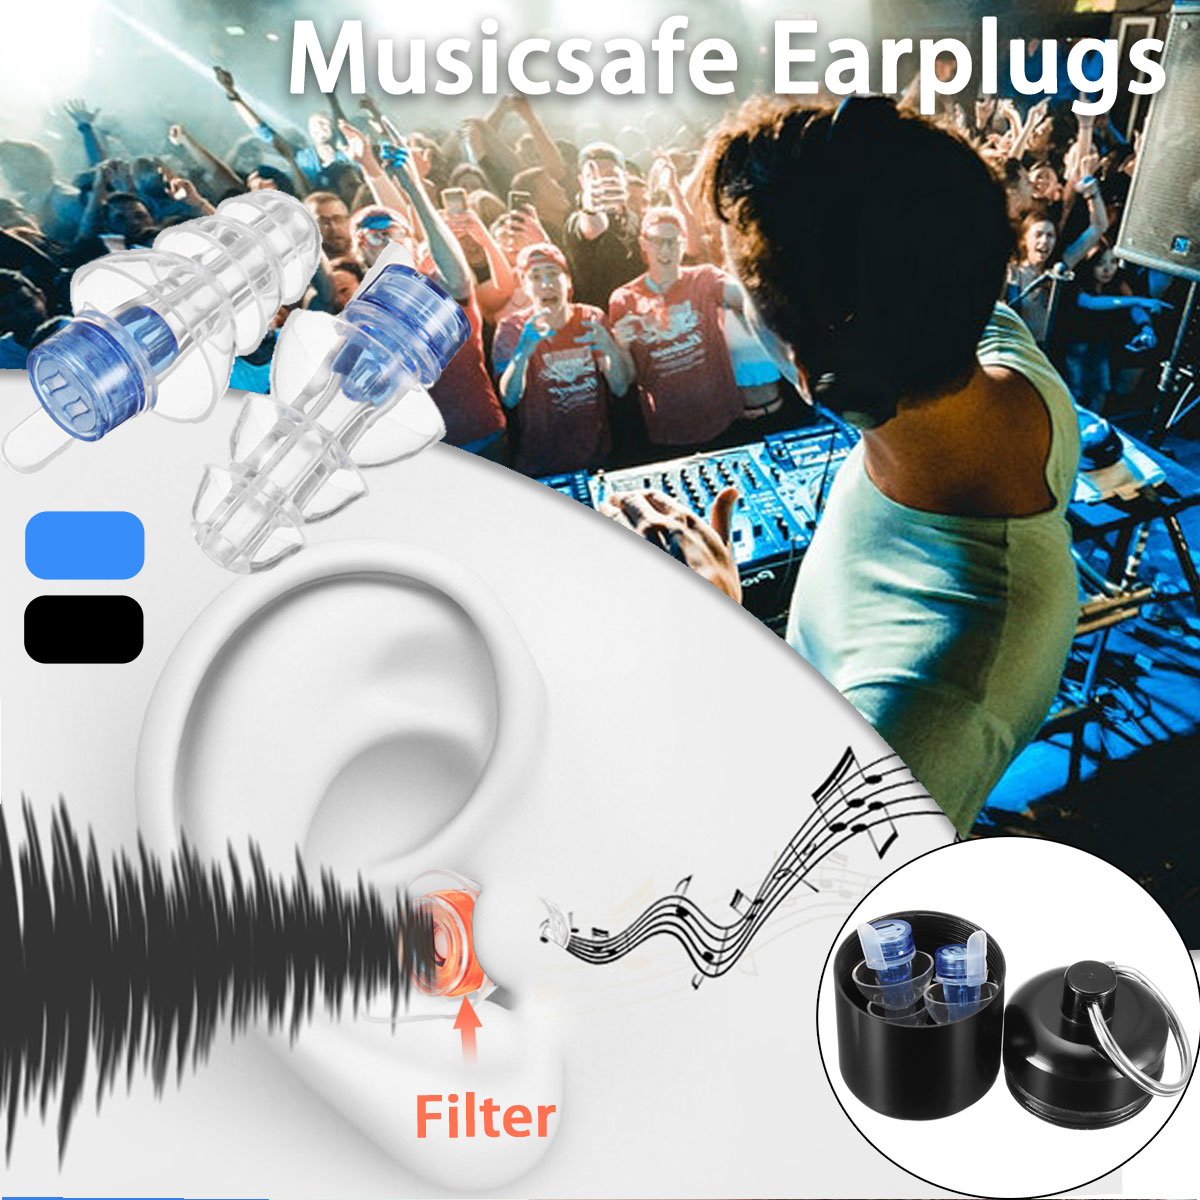 Anti Noise Ear Plugs Sleep Noise Reduction Cancelling Musician Hearing Protection Earplugs For Sleep Concert Bar Drummer Health